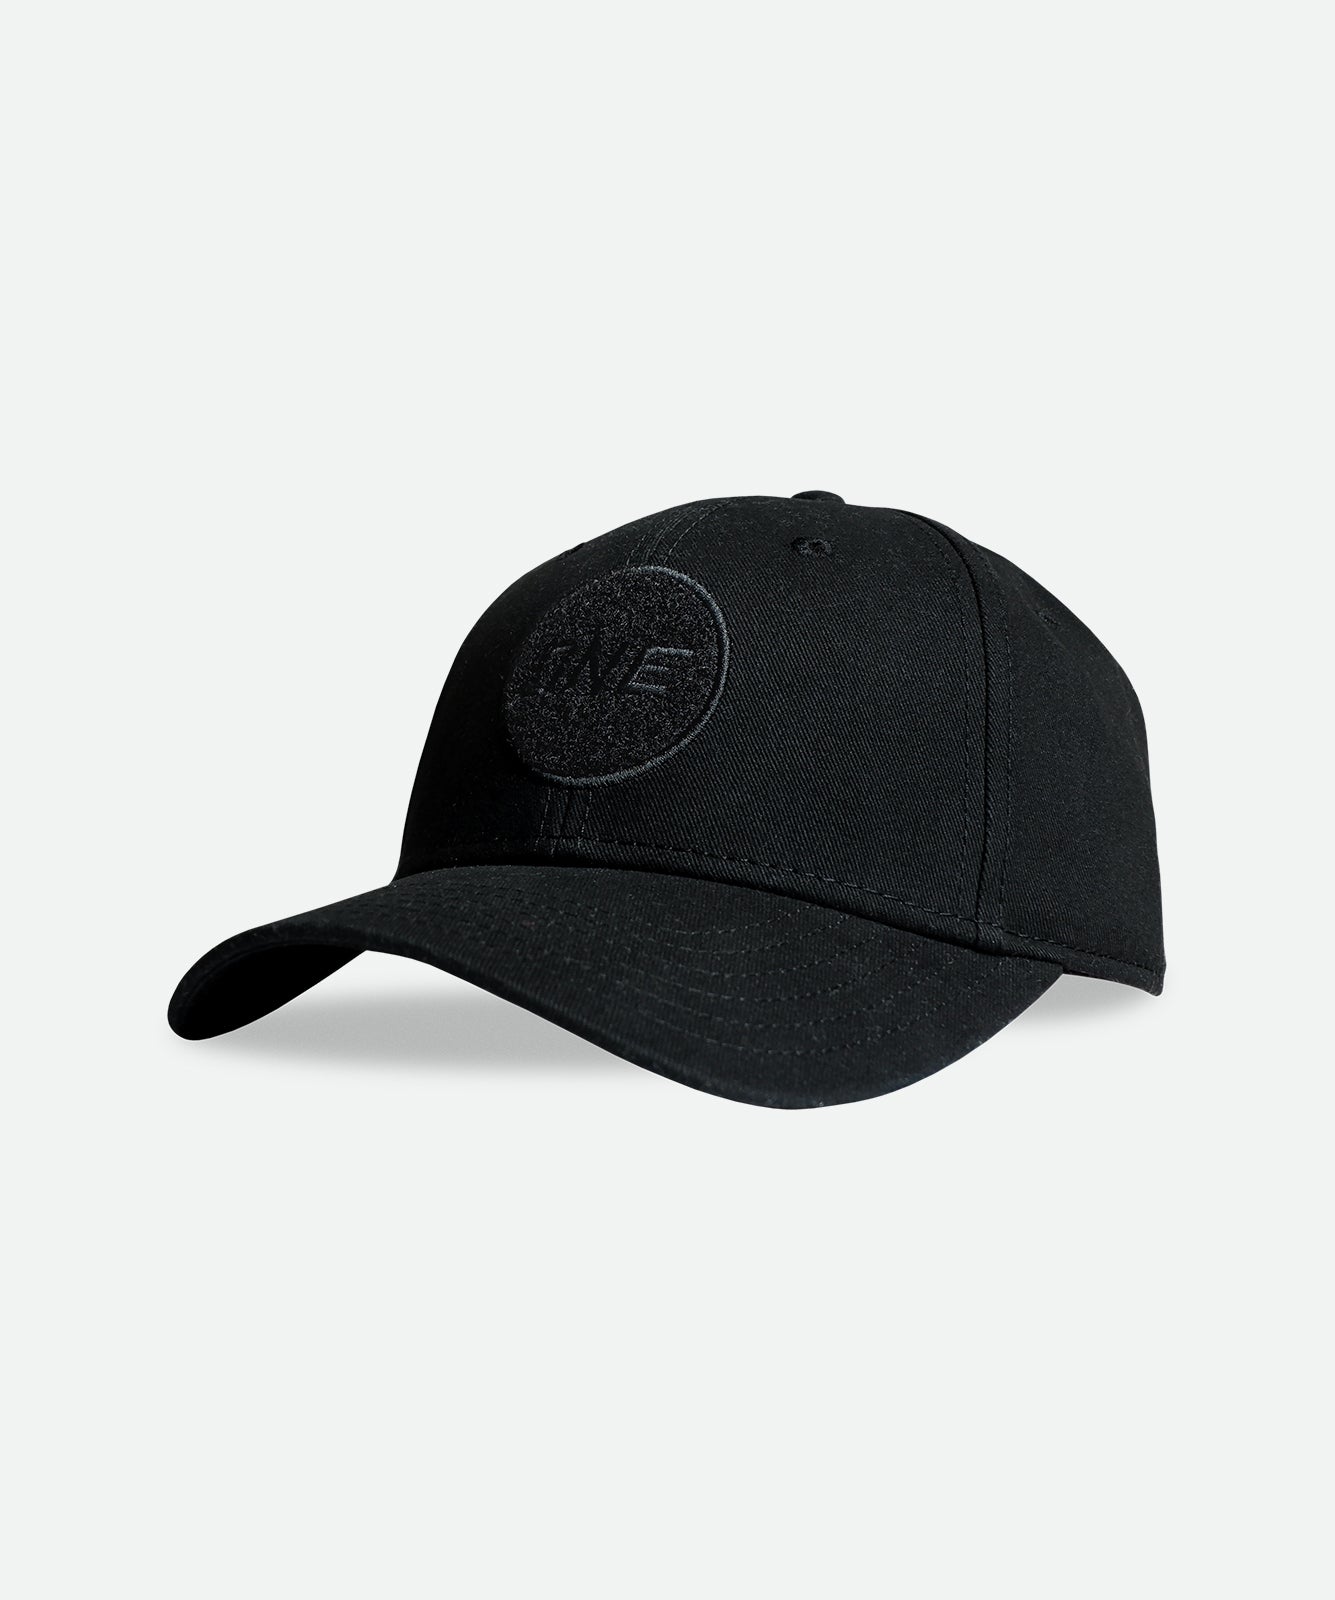 ONE Hero Cap (Black) - ONE.SHOP | The Official Online Shop of ONE Championship